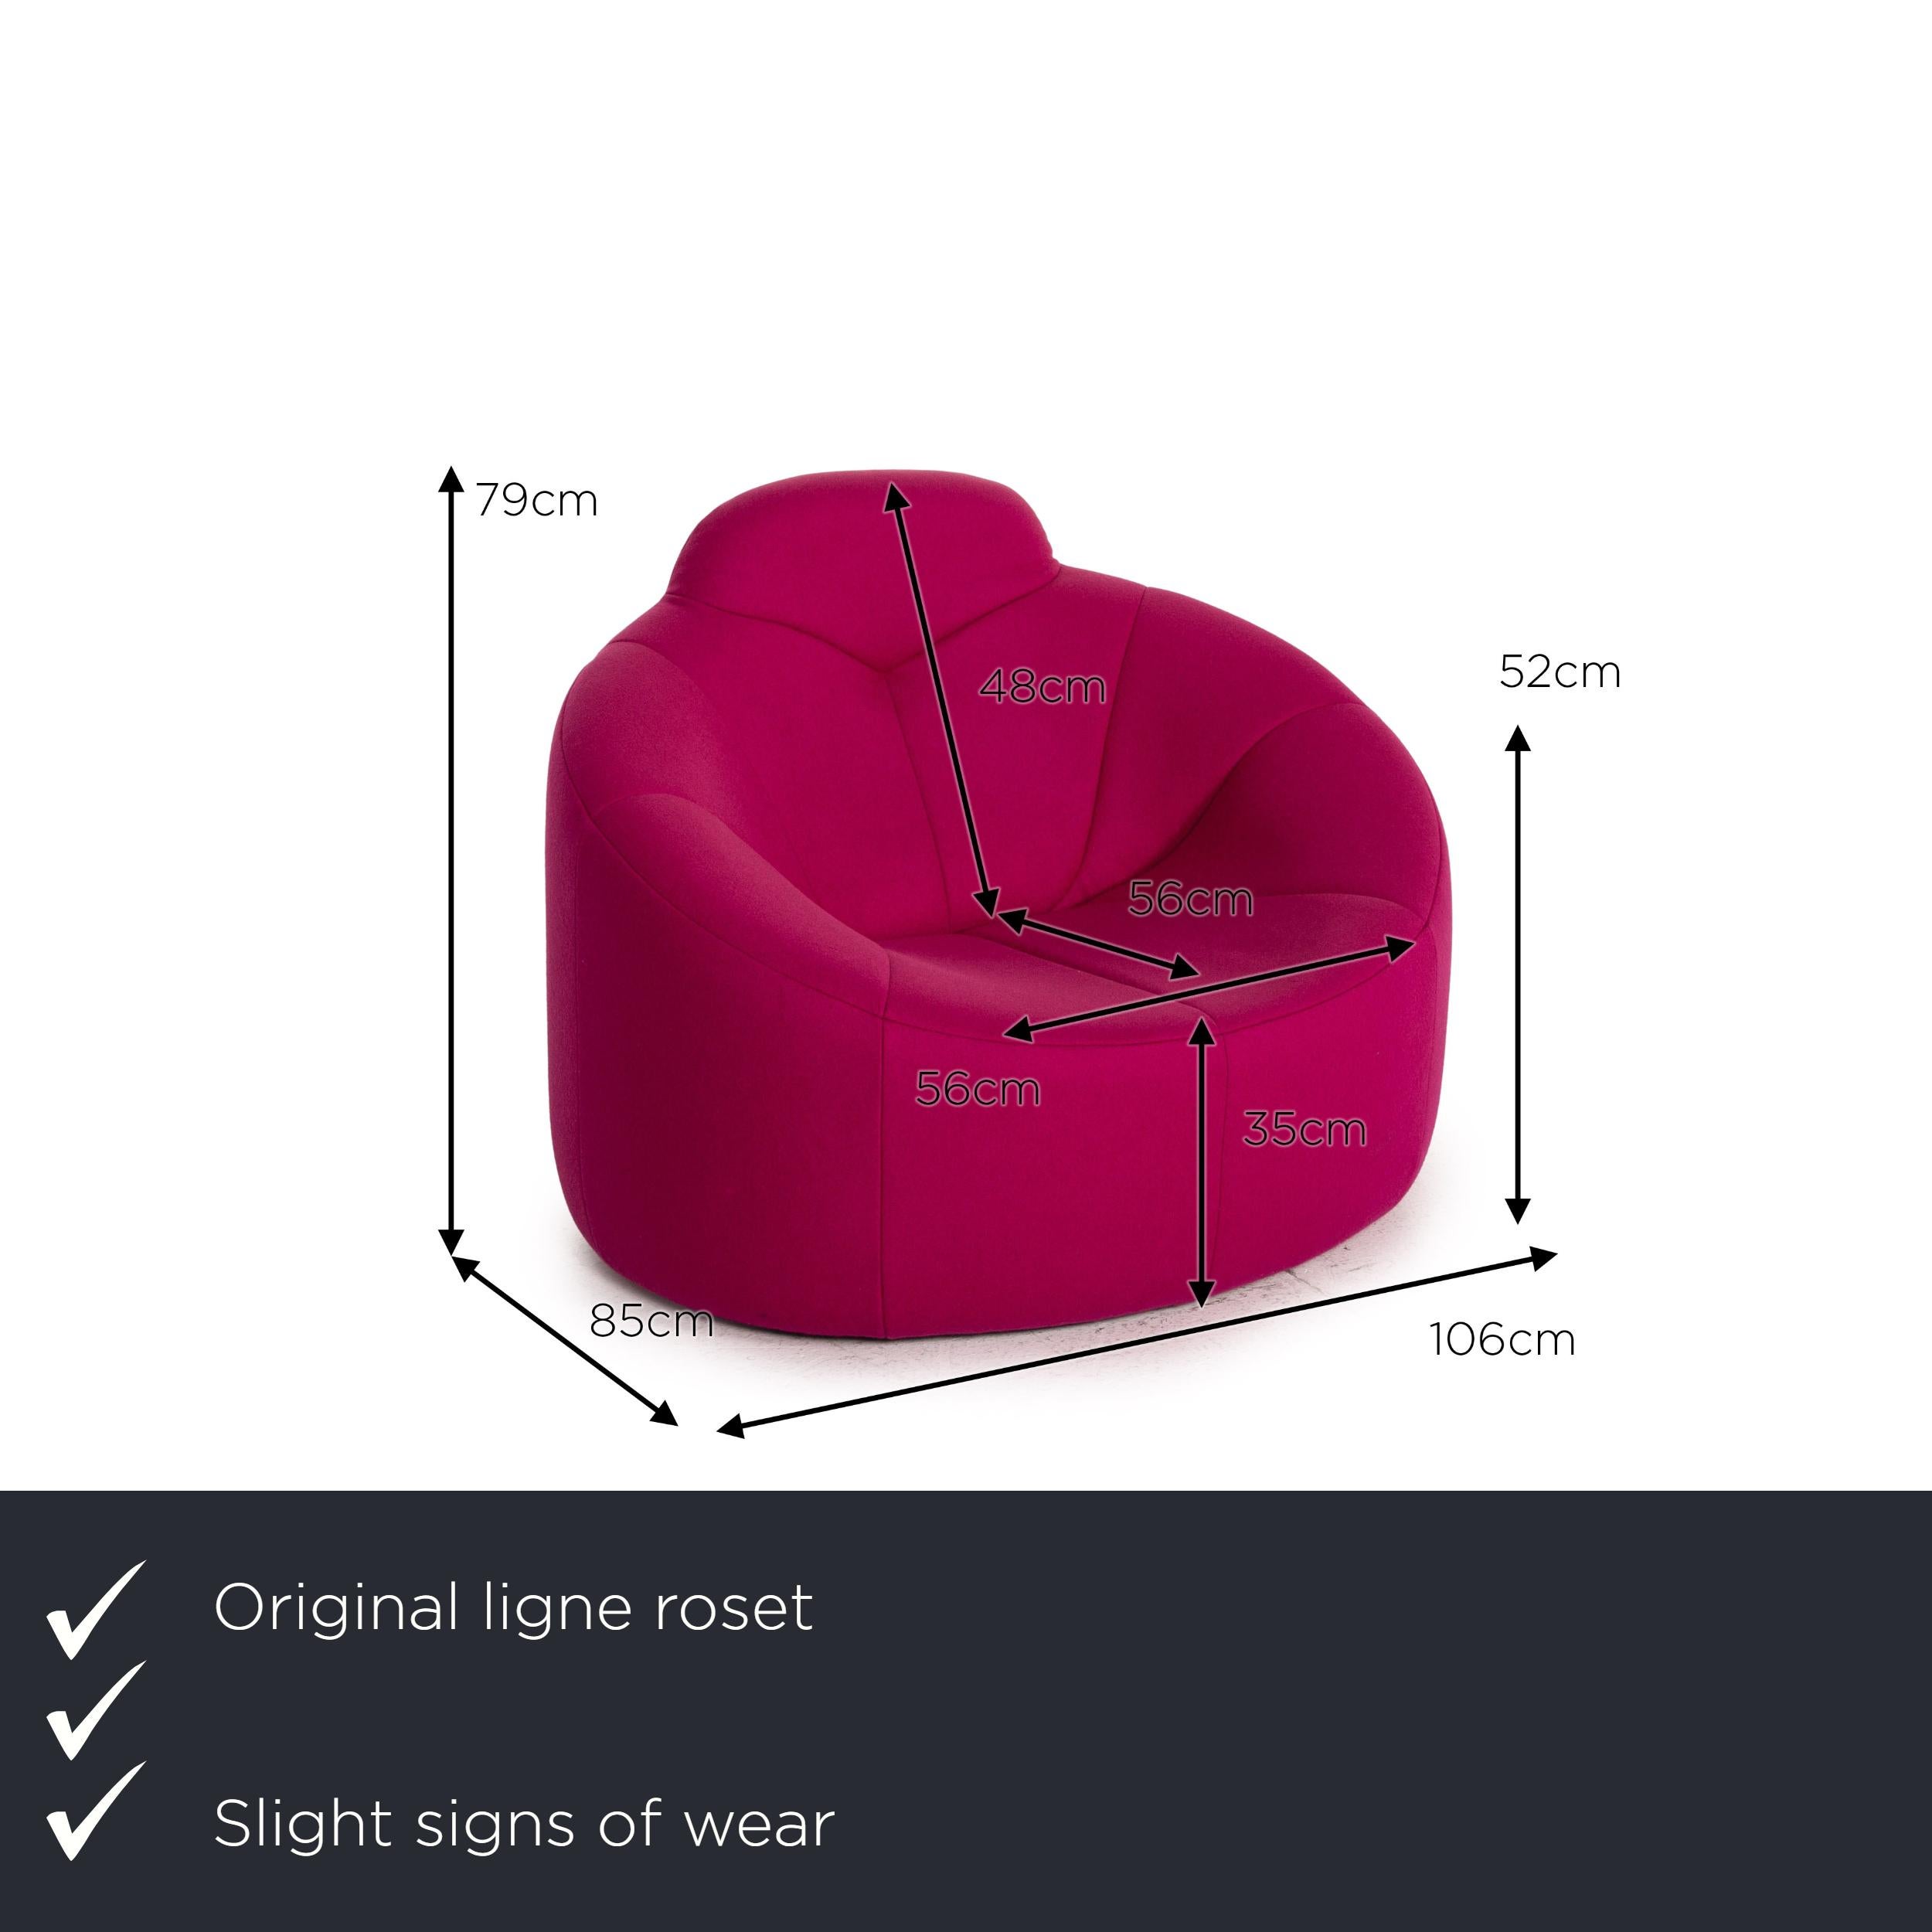 We present to you a ligne roset pumpkin fabric armchair including footstool pink.
 
 

 Product measurements in centimeters:
 

 depth: 85
 width: 106
 height: 79
 seat height: 35
 rest height: 52
 seat depth: 56
 seat width: 56
 back